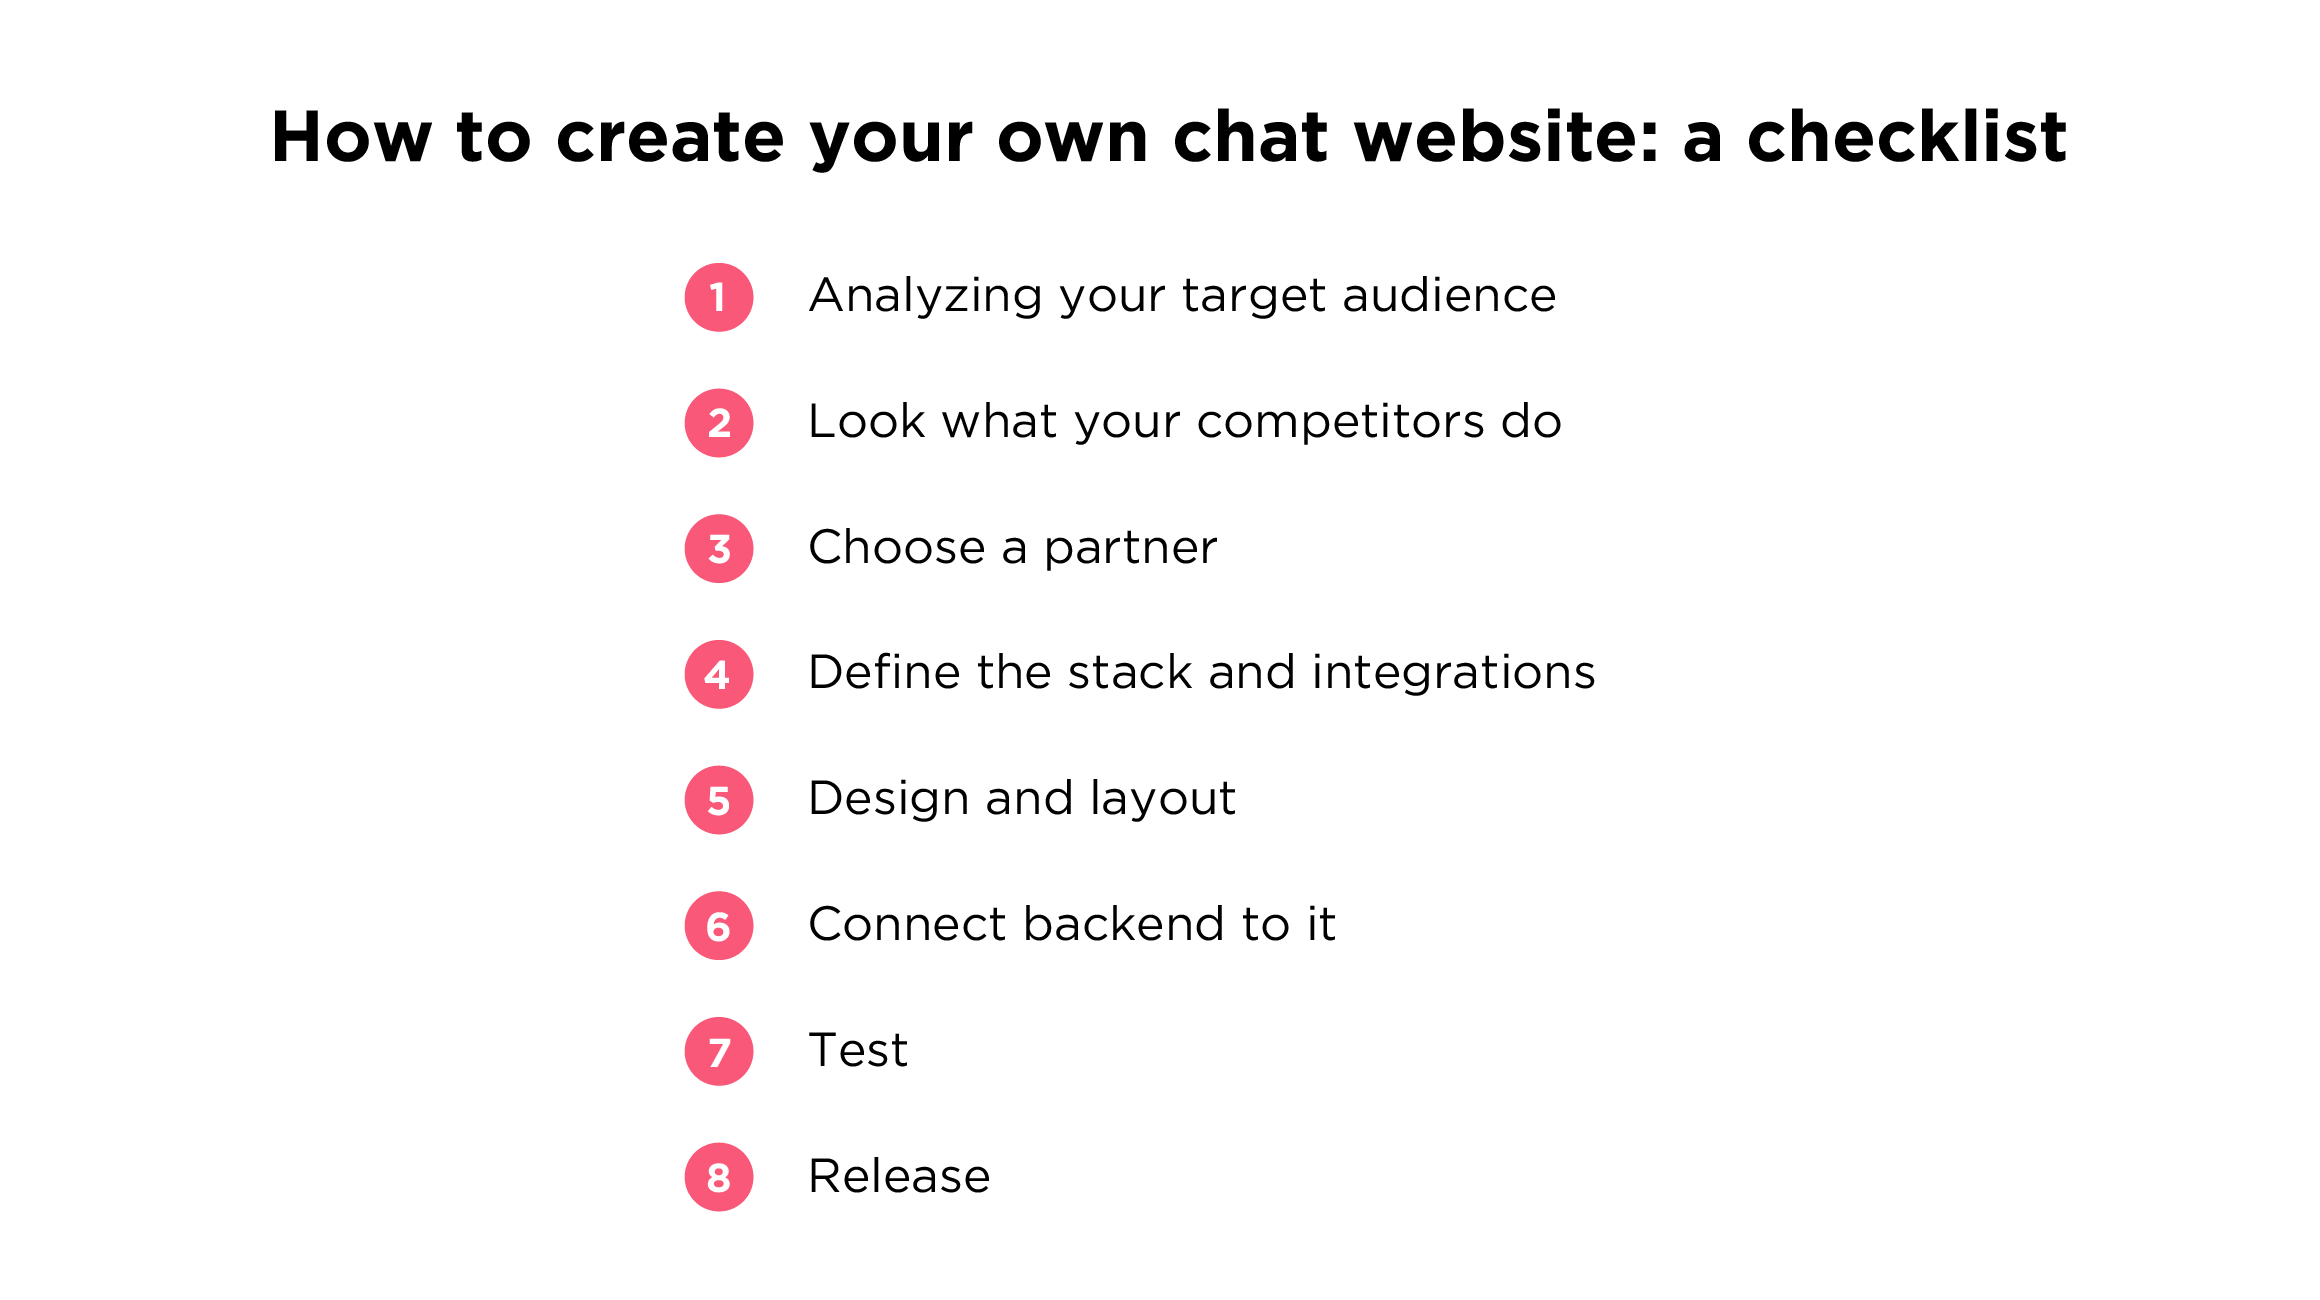 How to make your own chat website